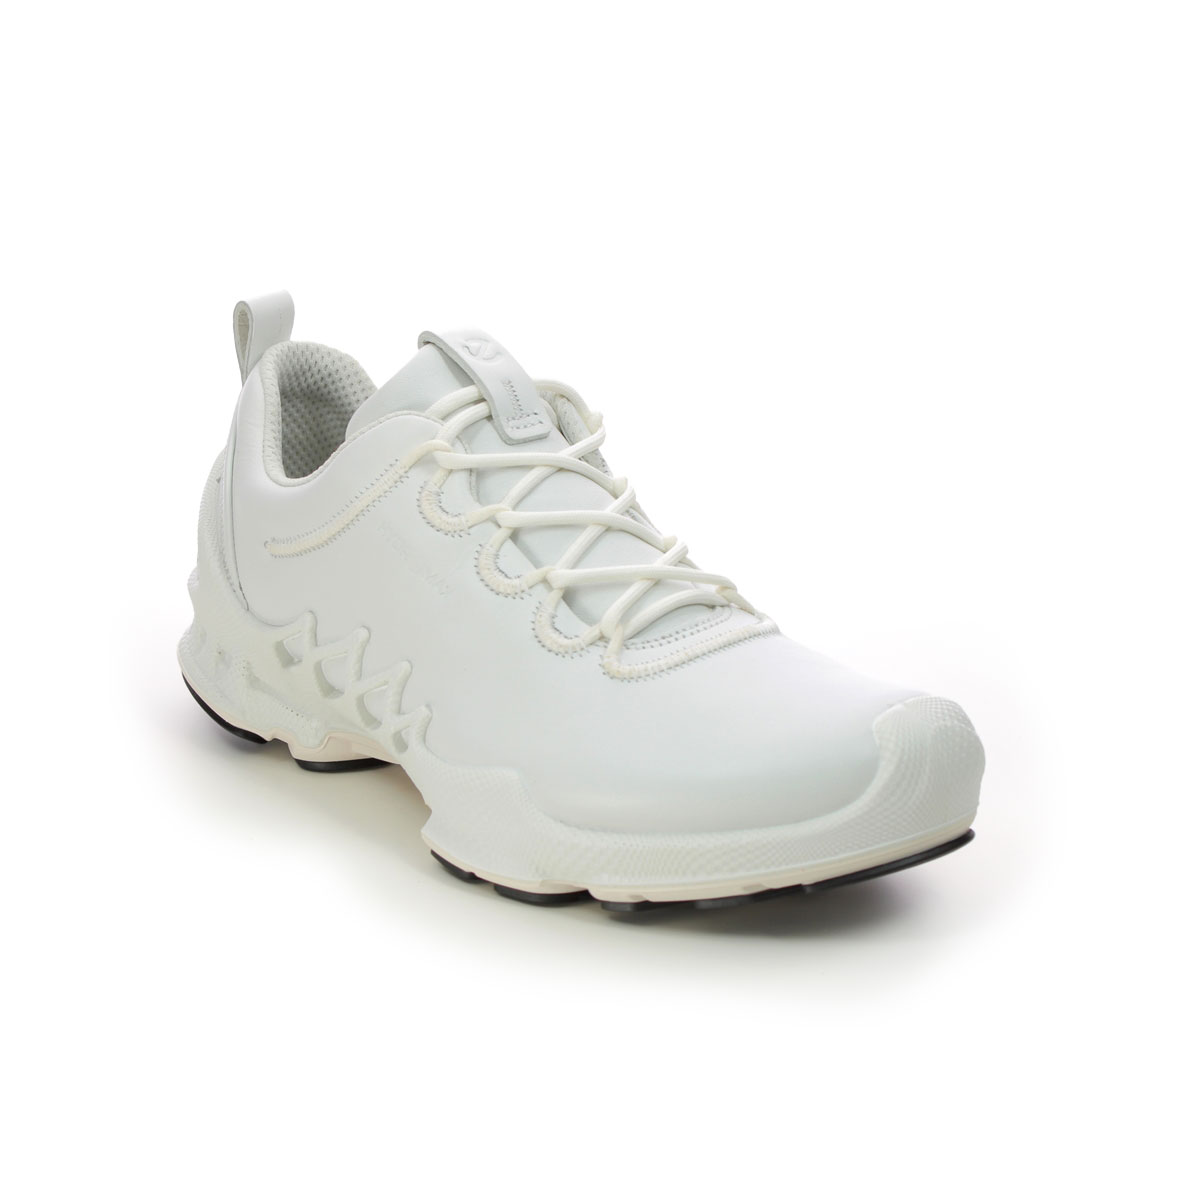 Ecco Biom Aex Hydromax White Leather Womens Trainers 802833-01007 In Size 40 In Plain White Leather